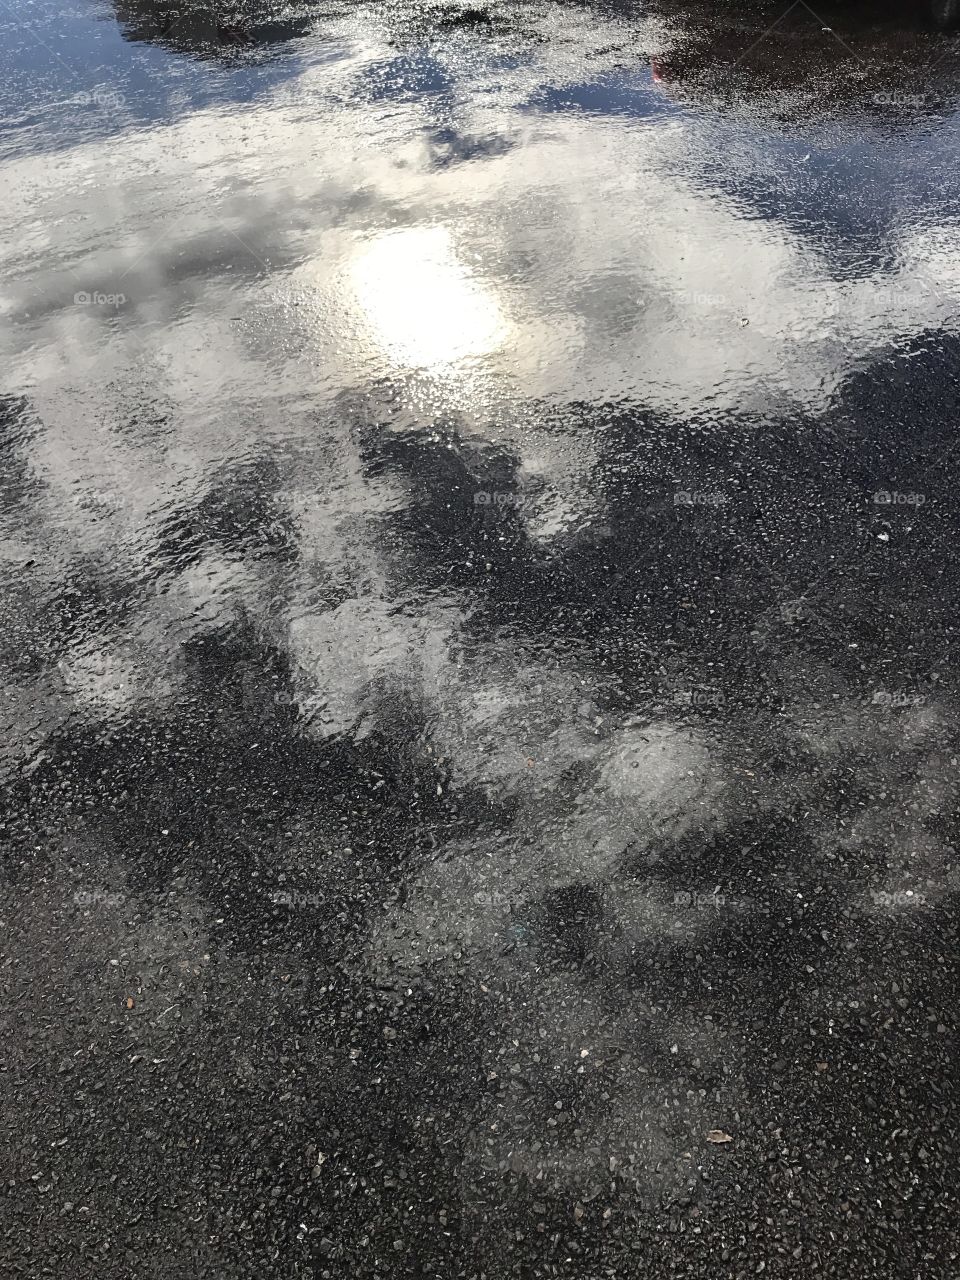 Reflection of clouds